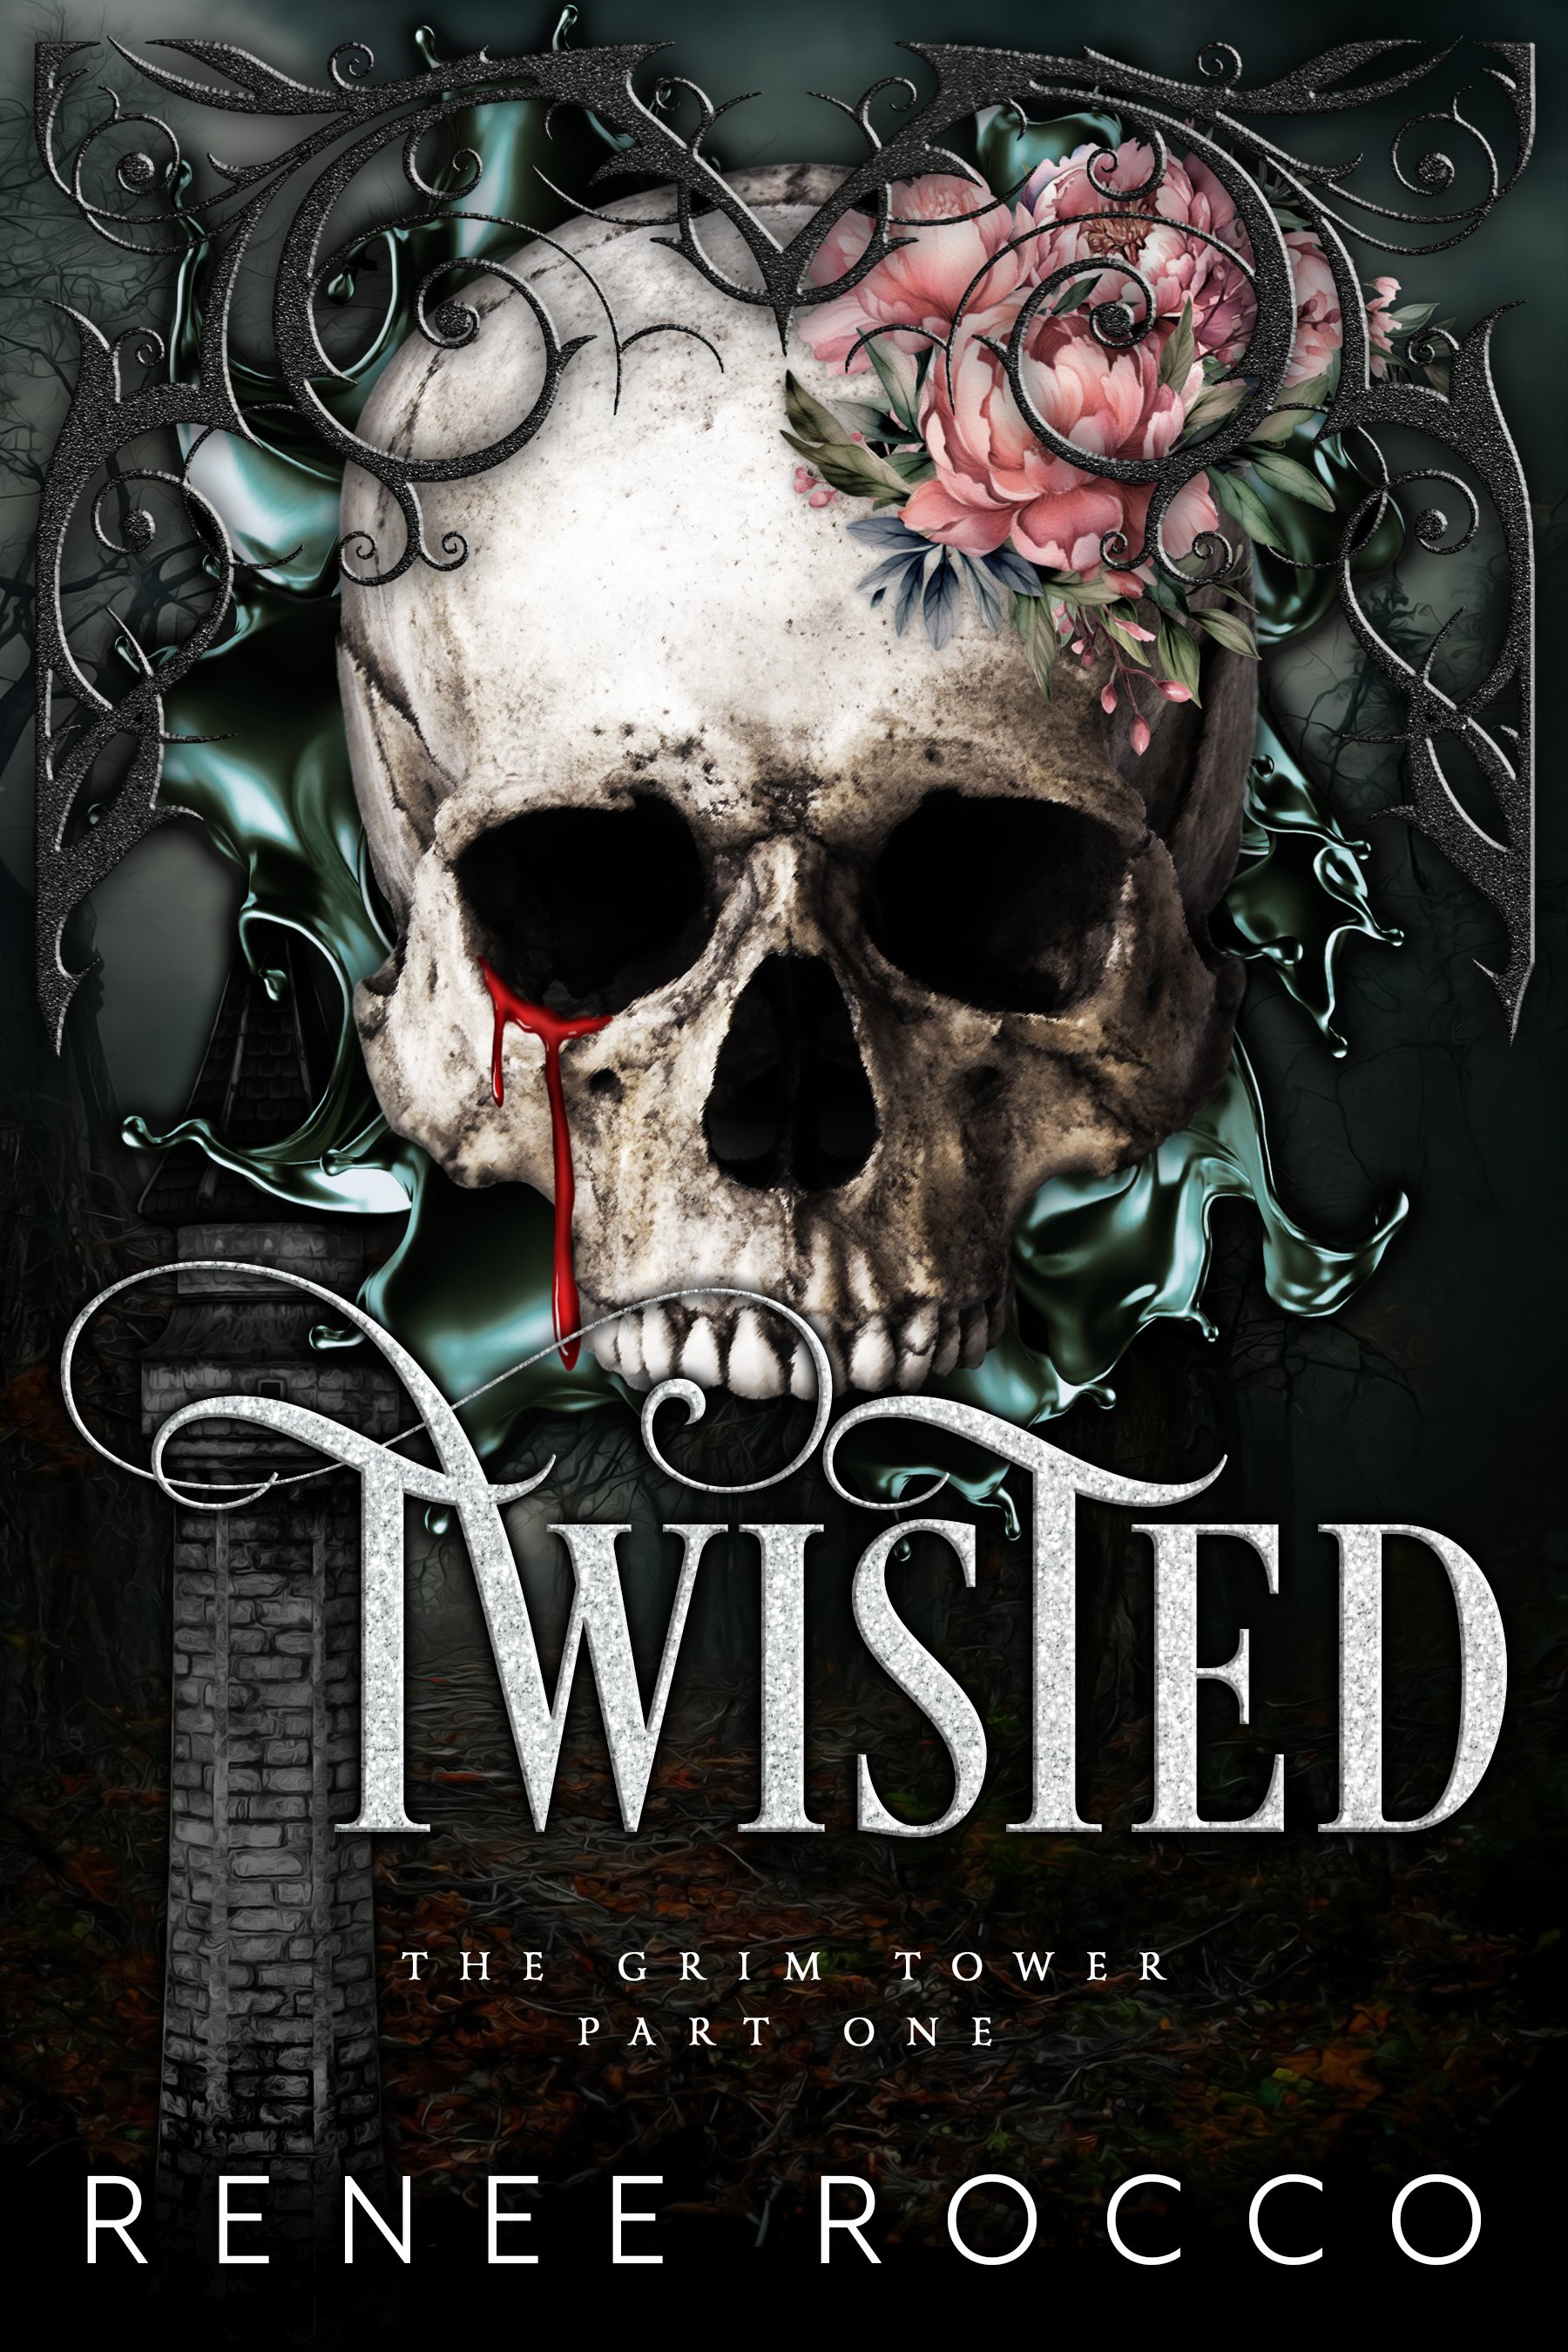 Twisted by Renee Rocco